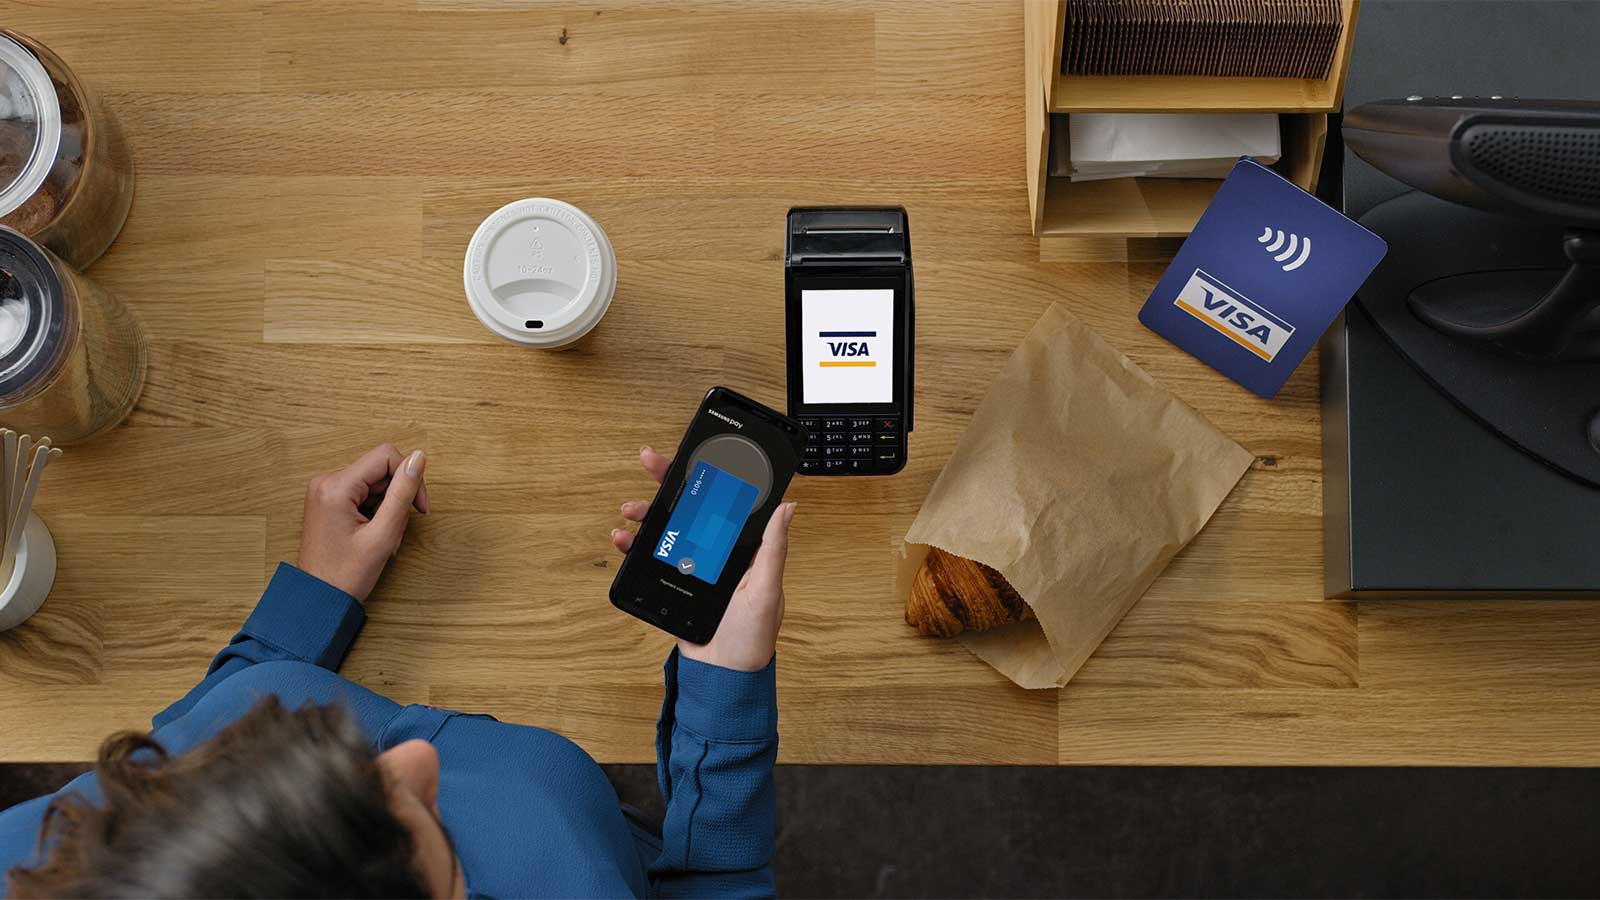 Customer paying for a purchase via a mobile phone using Samsung Pay.